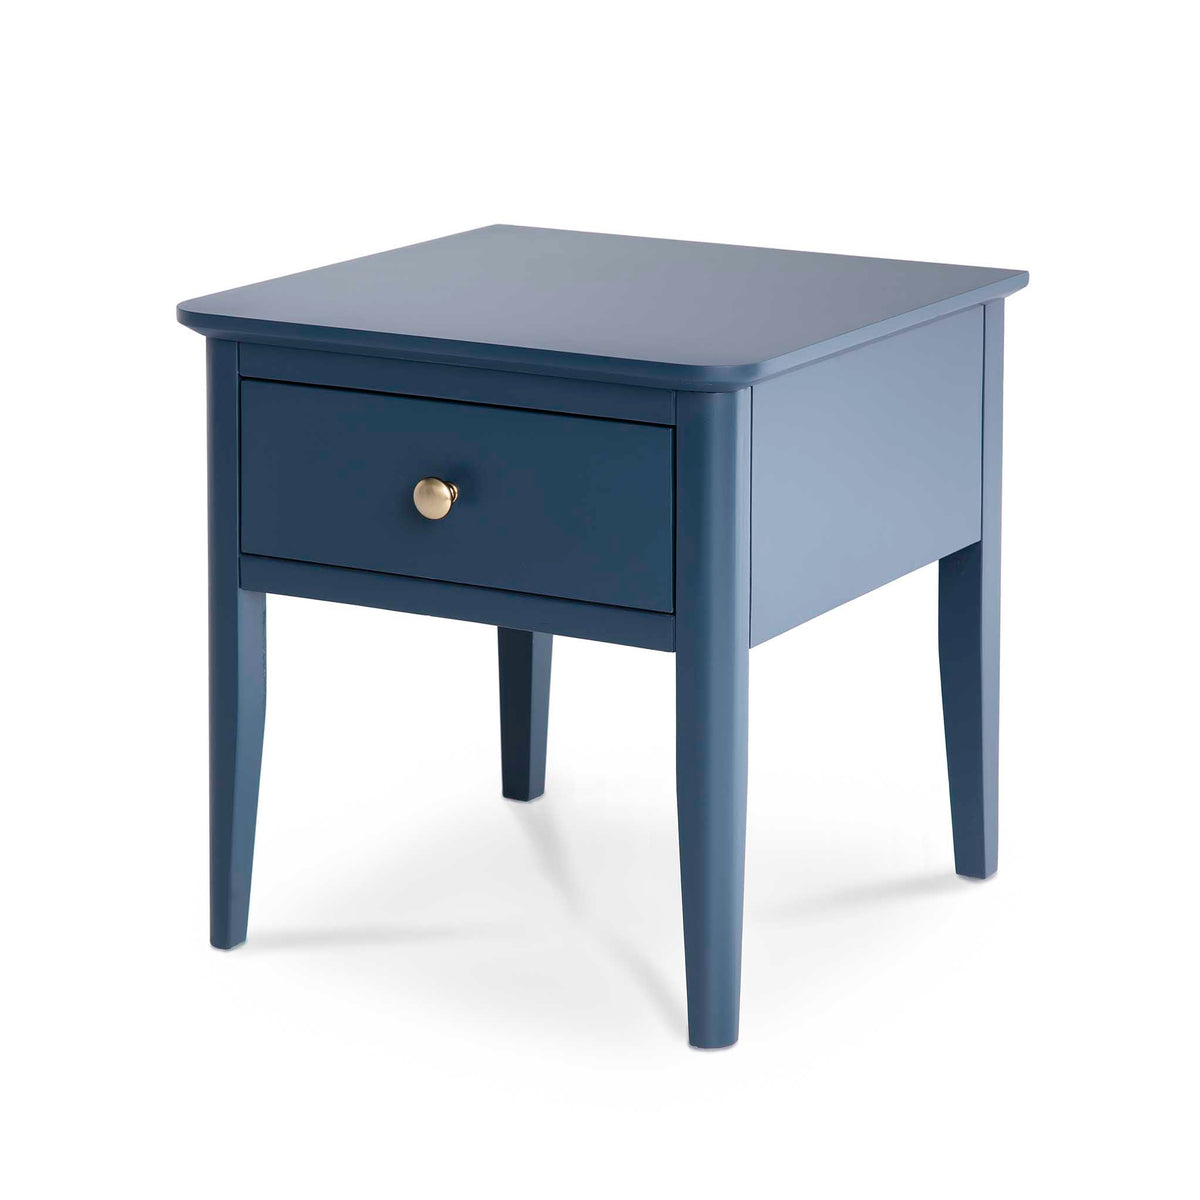 Stirling Blue Side Lamp Table - Side view